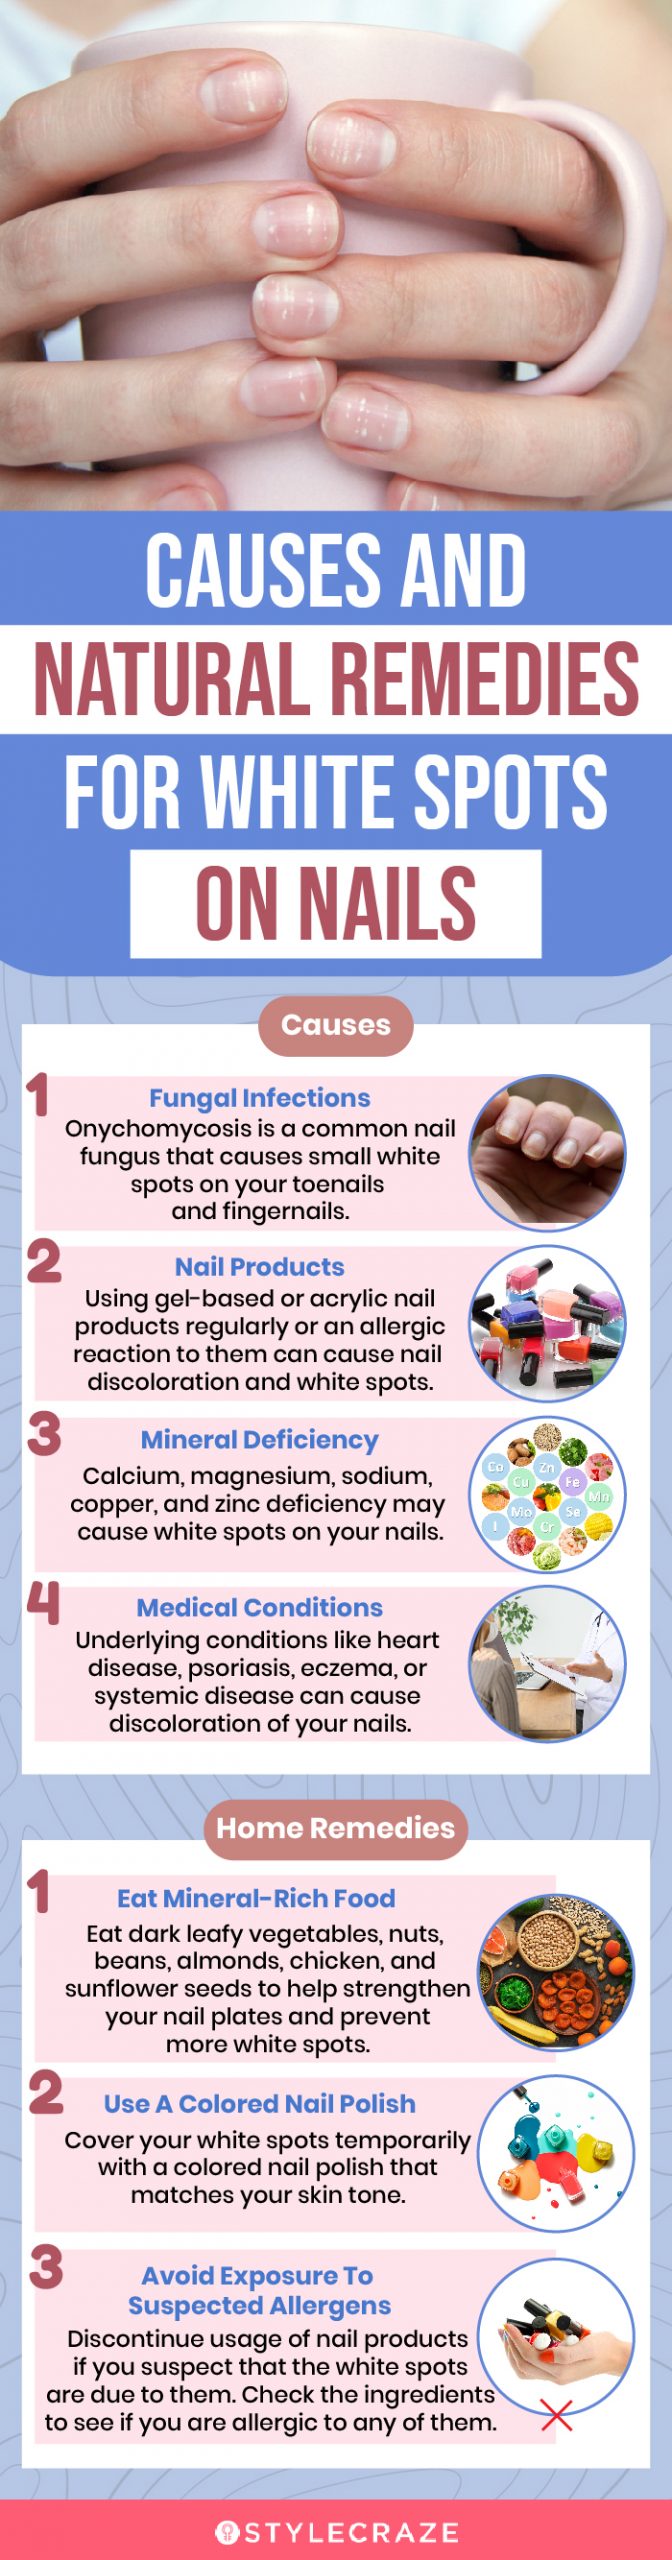 After Febrile Illness In Children And Infants Fall Nails Nail Changes Stock  Photo - Download Image Now - iStock